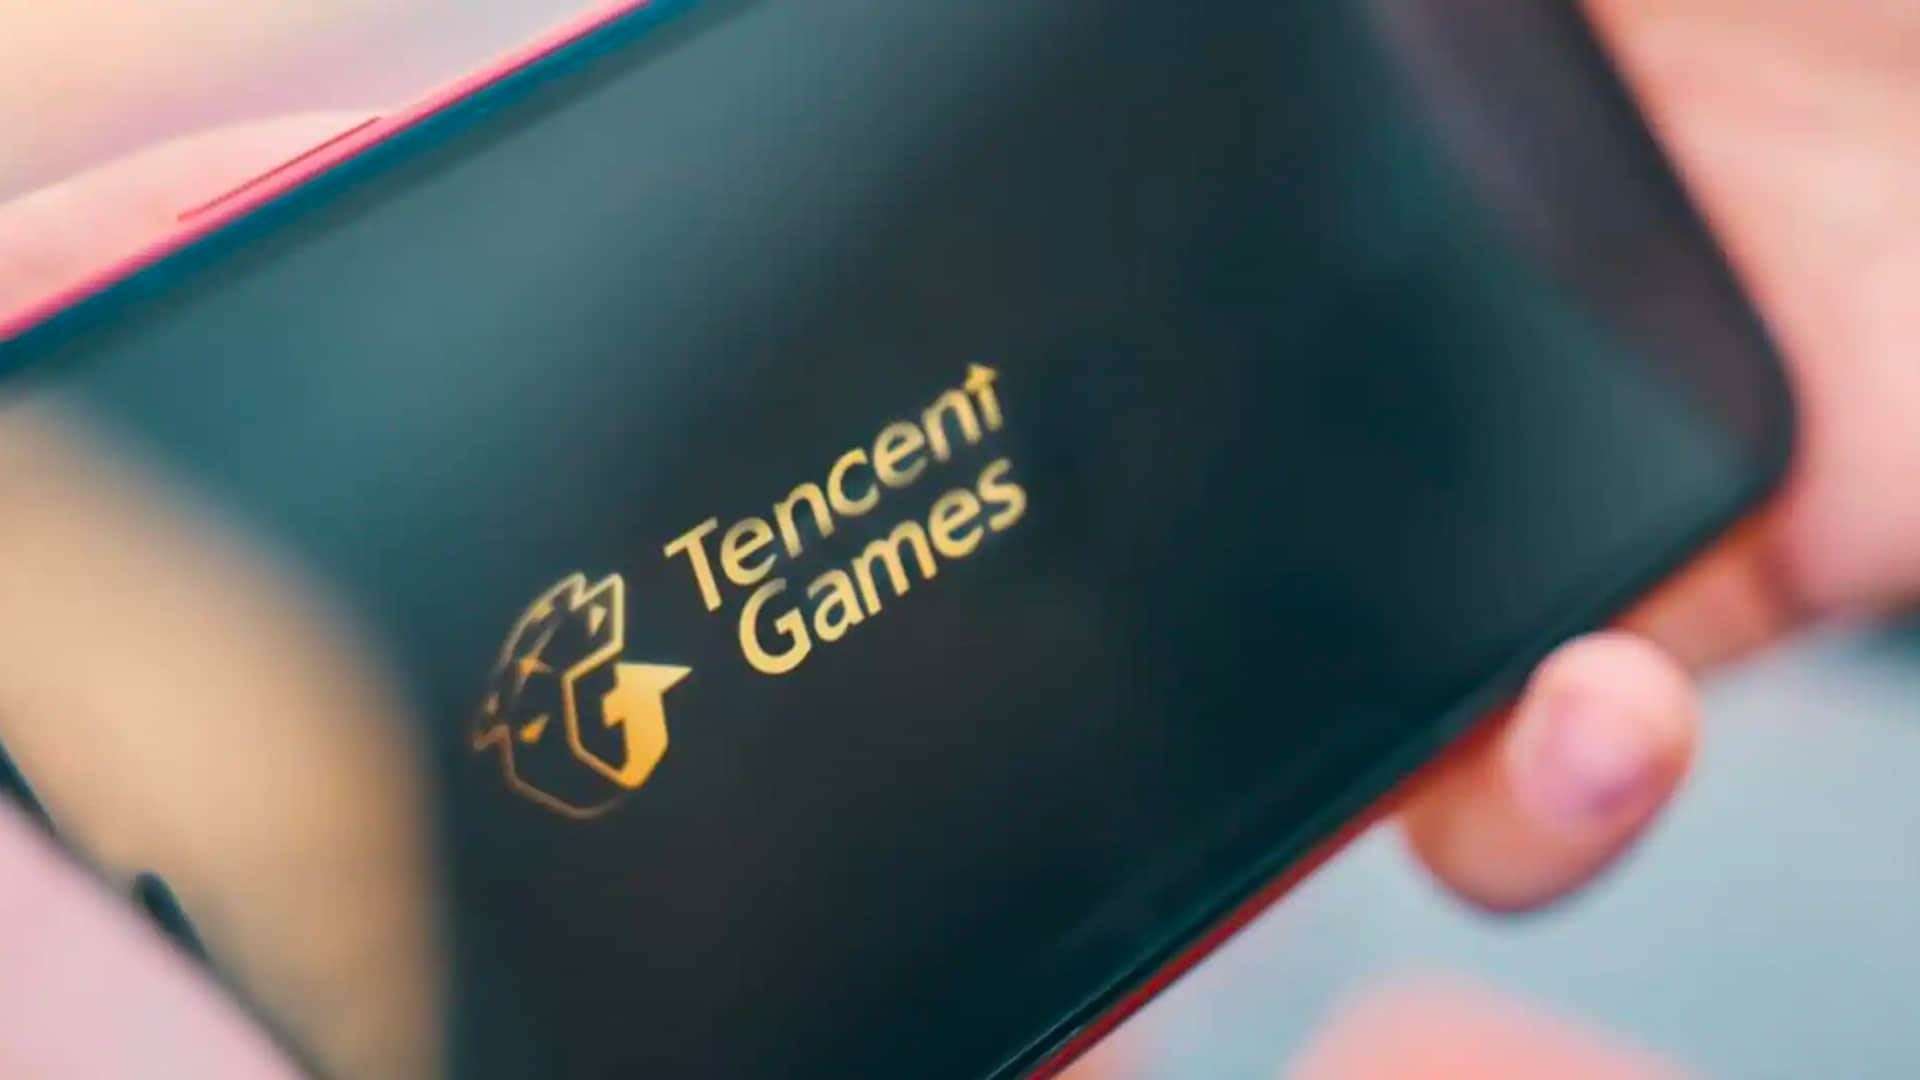 image for China’s gaming crackdown causes top 3 companies $80 bn market value loss, Tencent alone sheds $50 bn